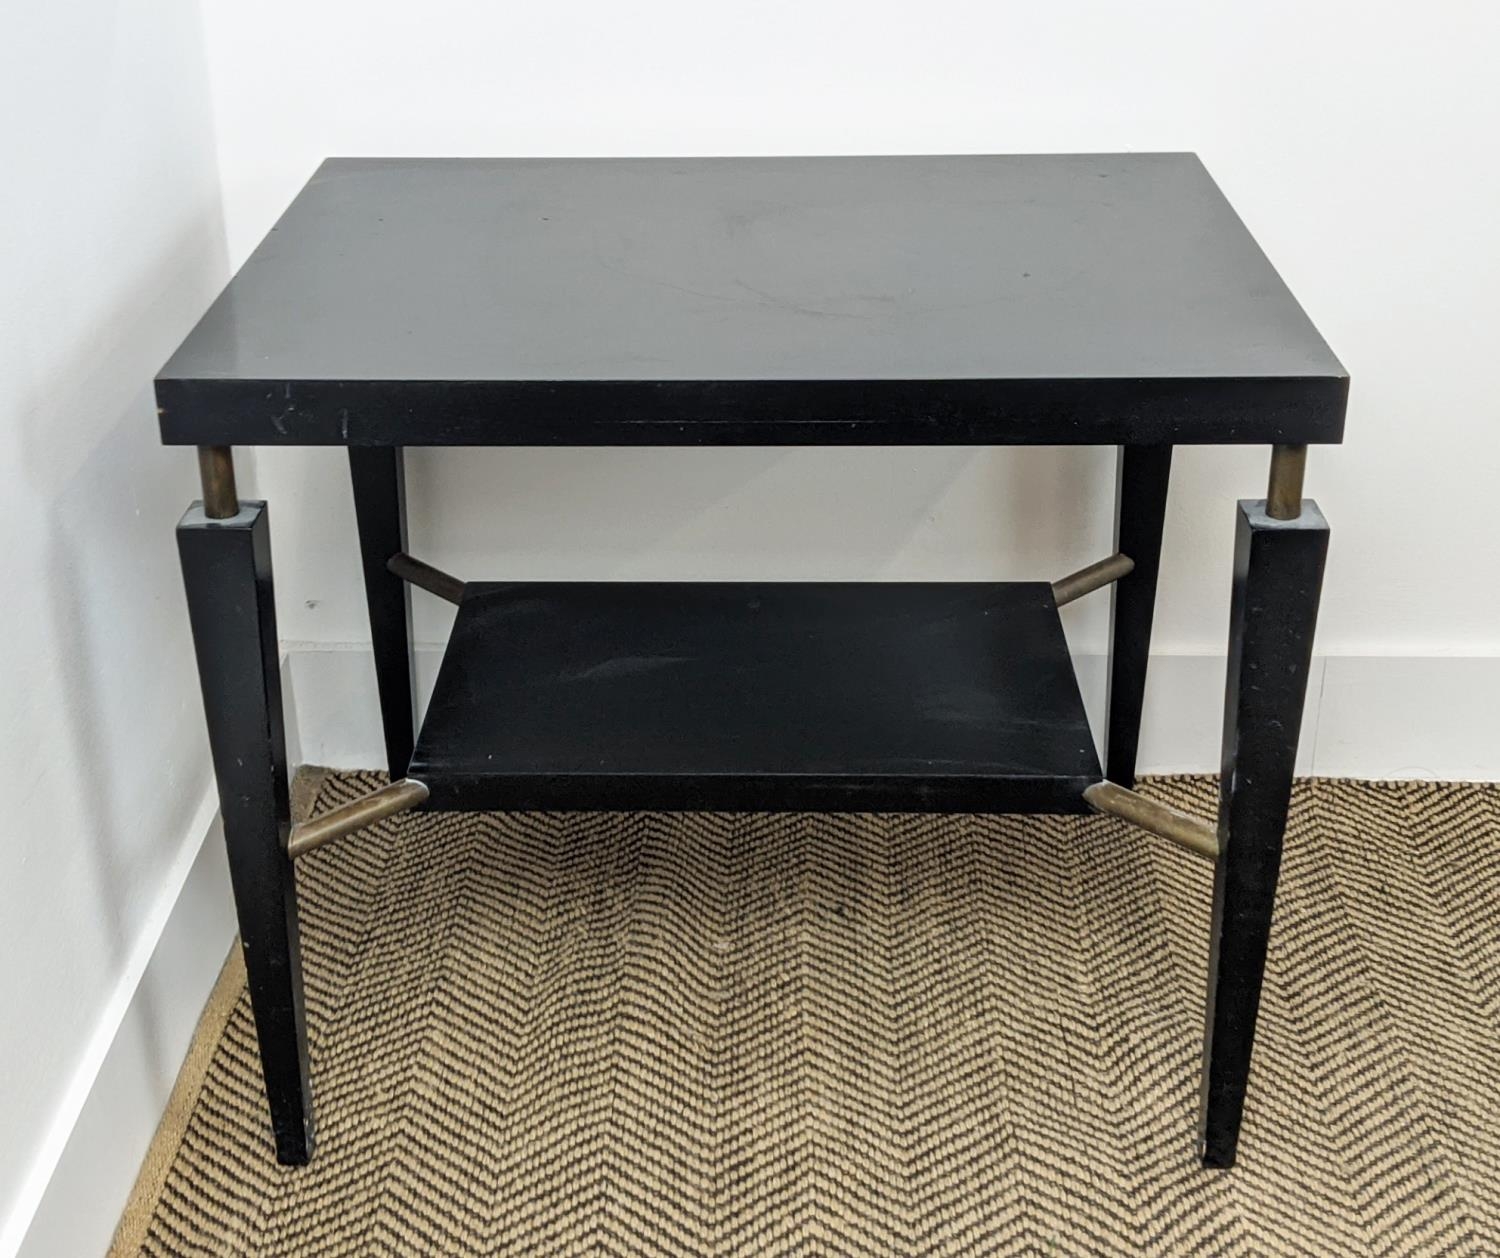 SIDE TABLE, reputedly by Paulo Moschino, 65cm W x 50cm D in an ebonised finish.